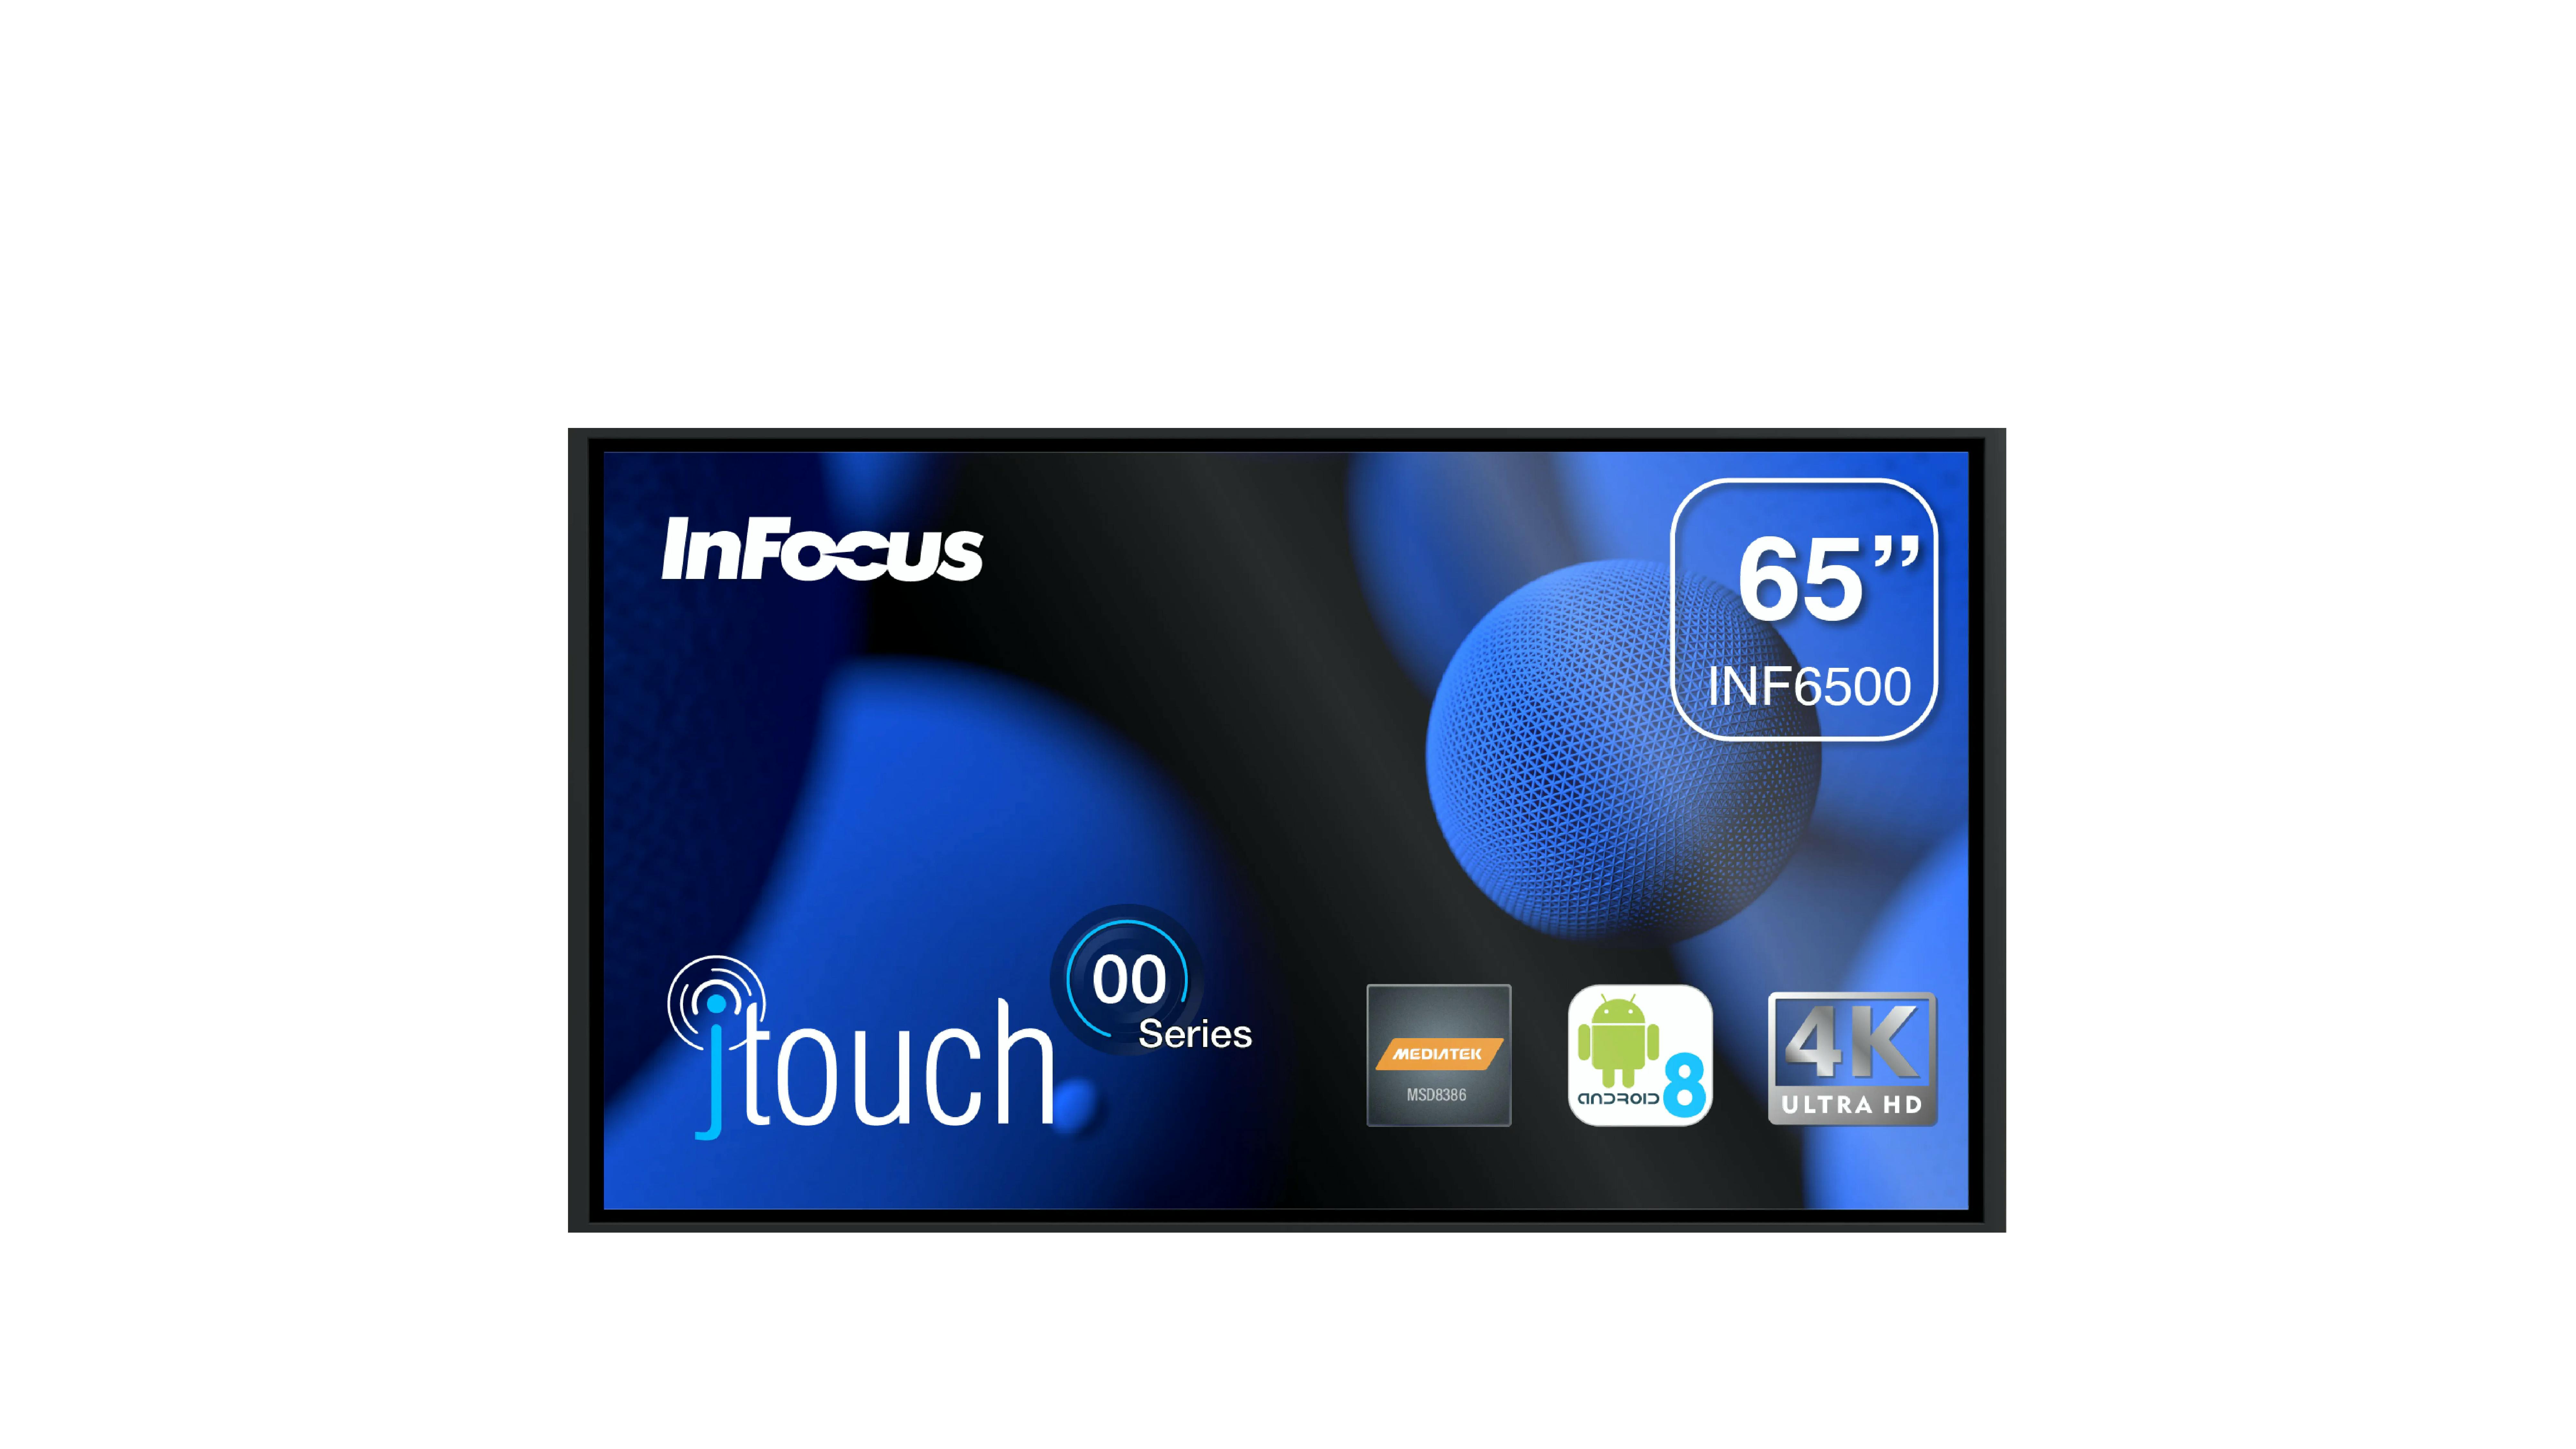 JTouch 00 Series- Outstanding Value From 00